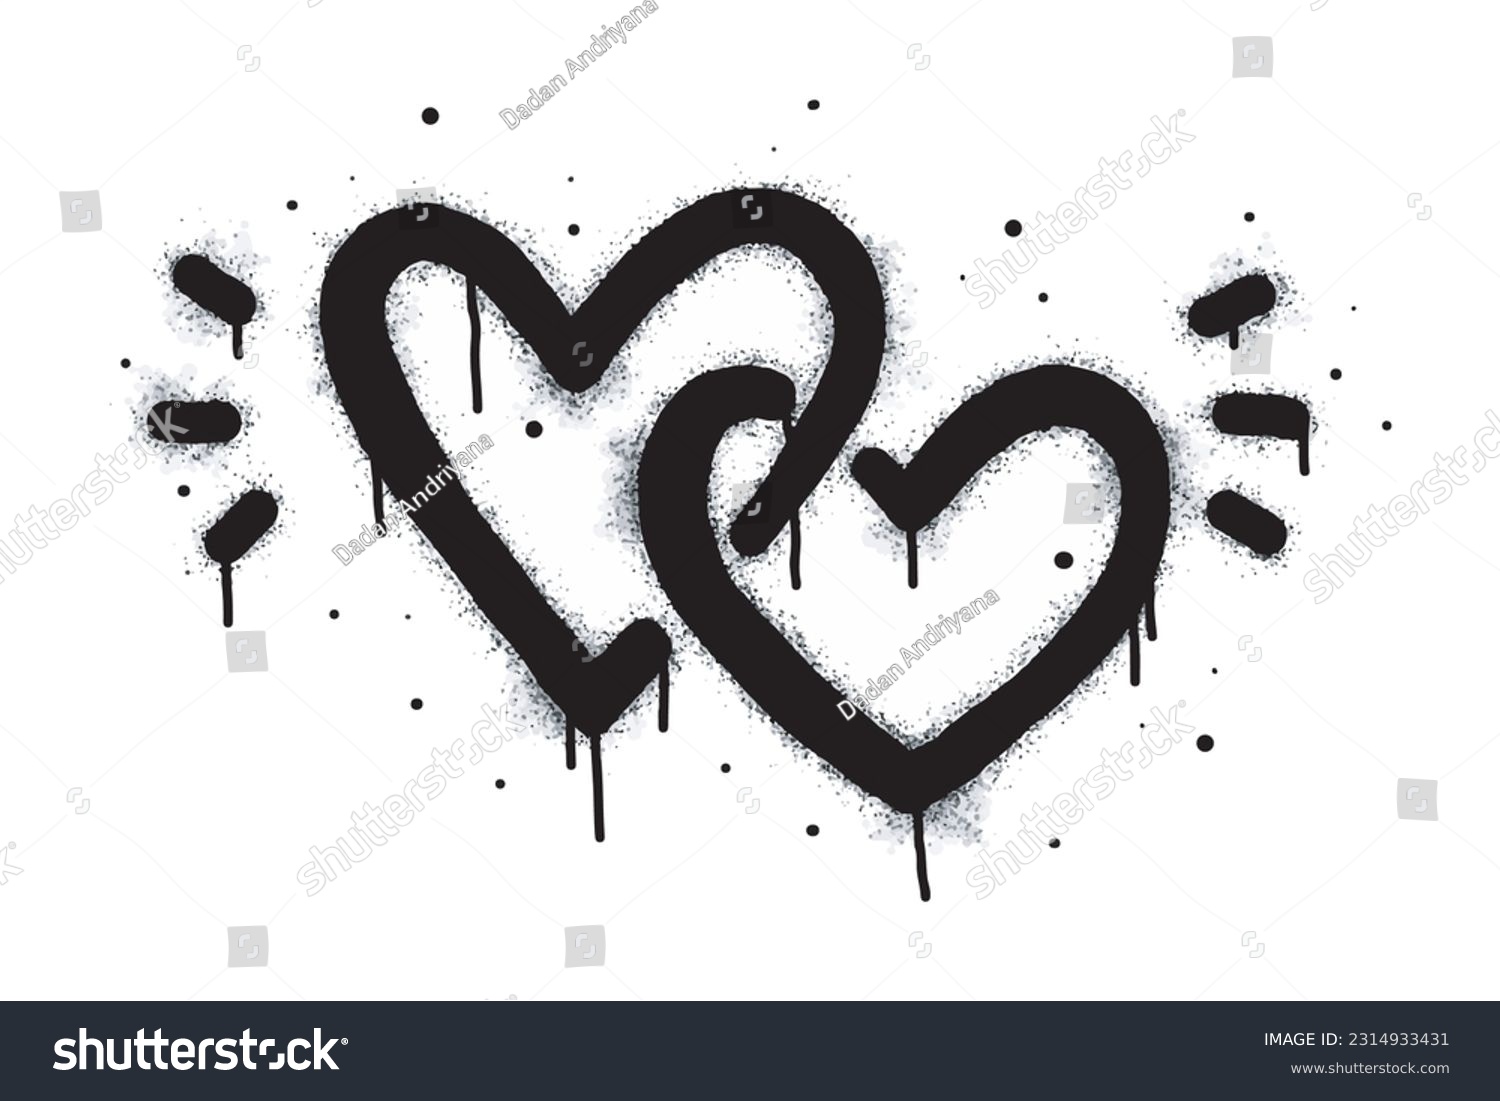 SVG of Set of graffiti hearts Signs Spray painted in black on white. Love heart drop symbol. isolated on white background. vector illustration svg